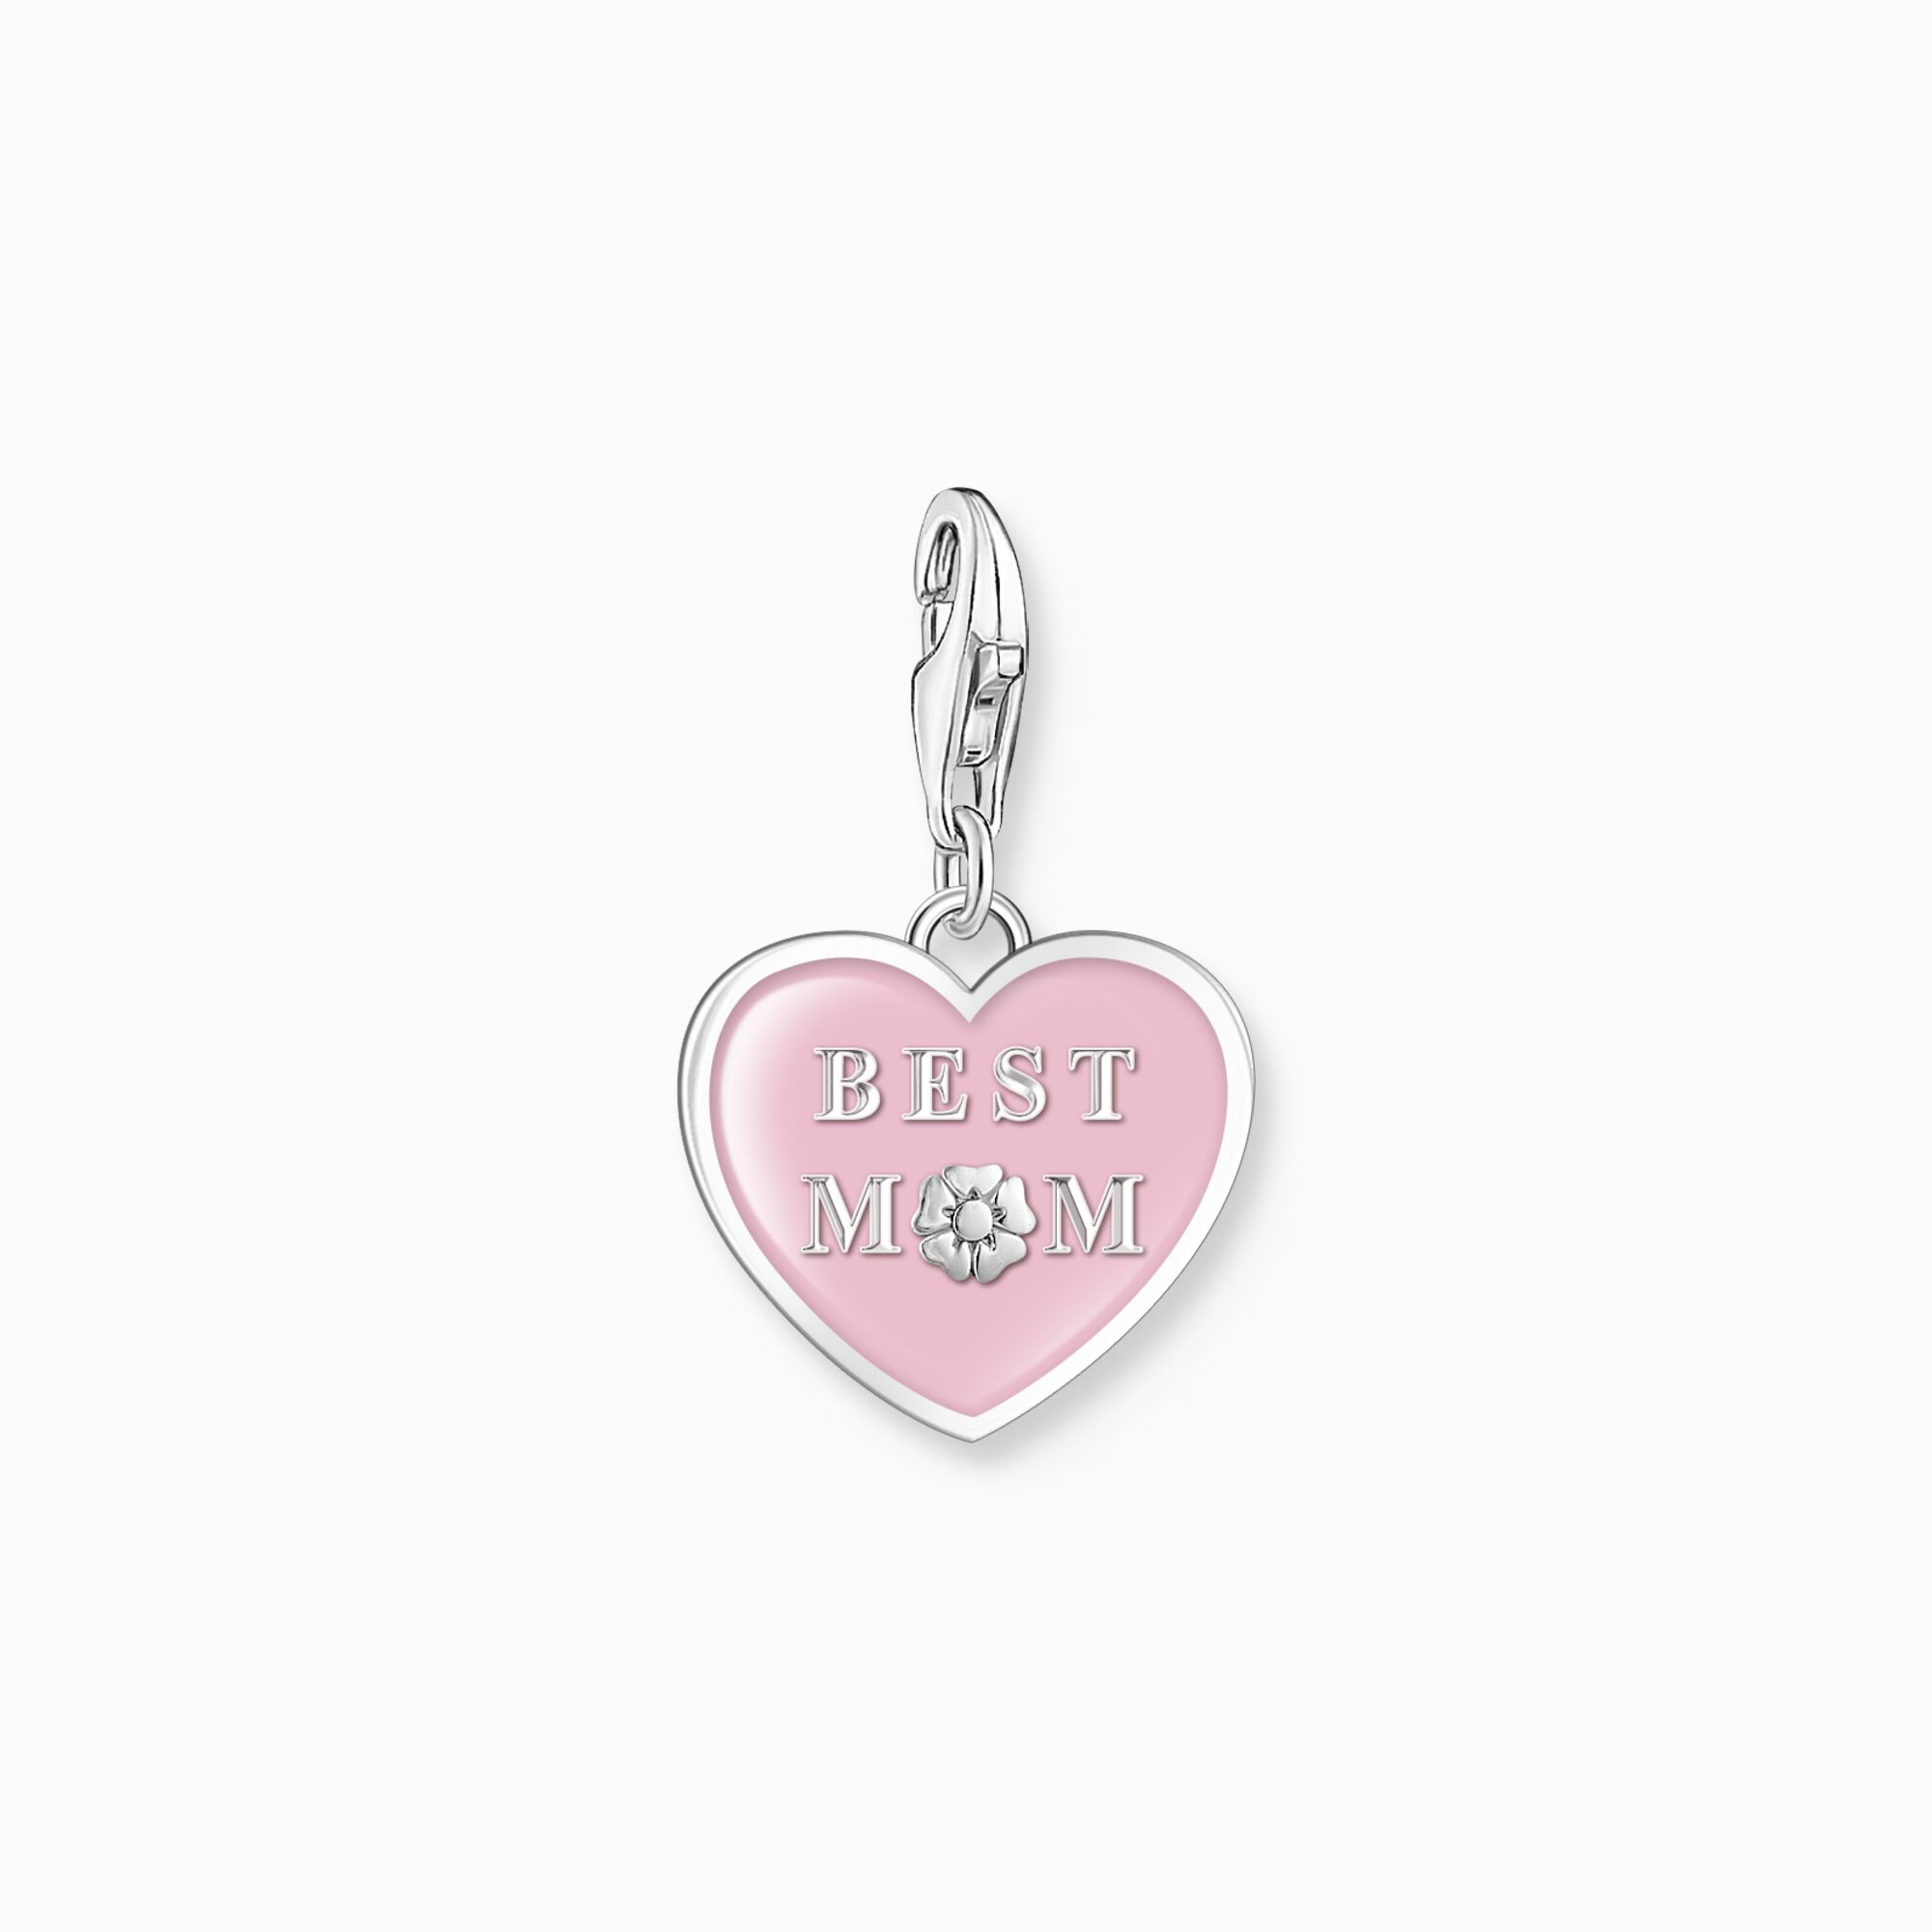 Charm pendant pink heart with Best Mom silver from the Charm Club collection in the THOMAS SABO online store